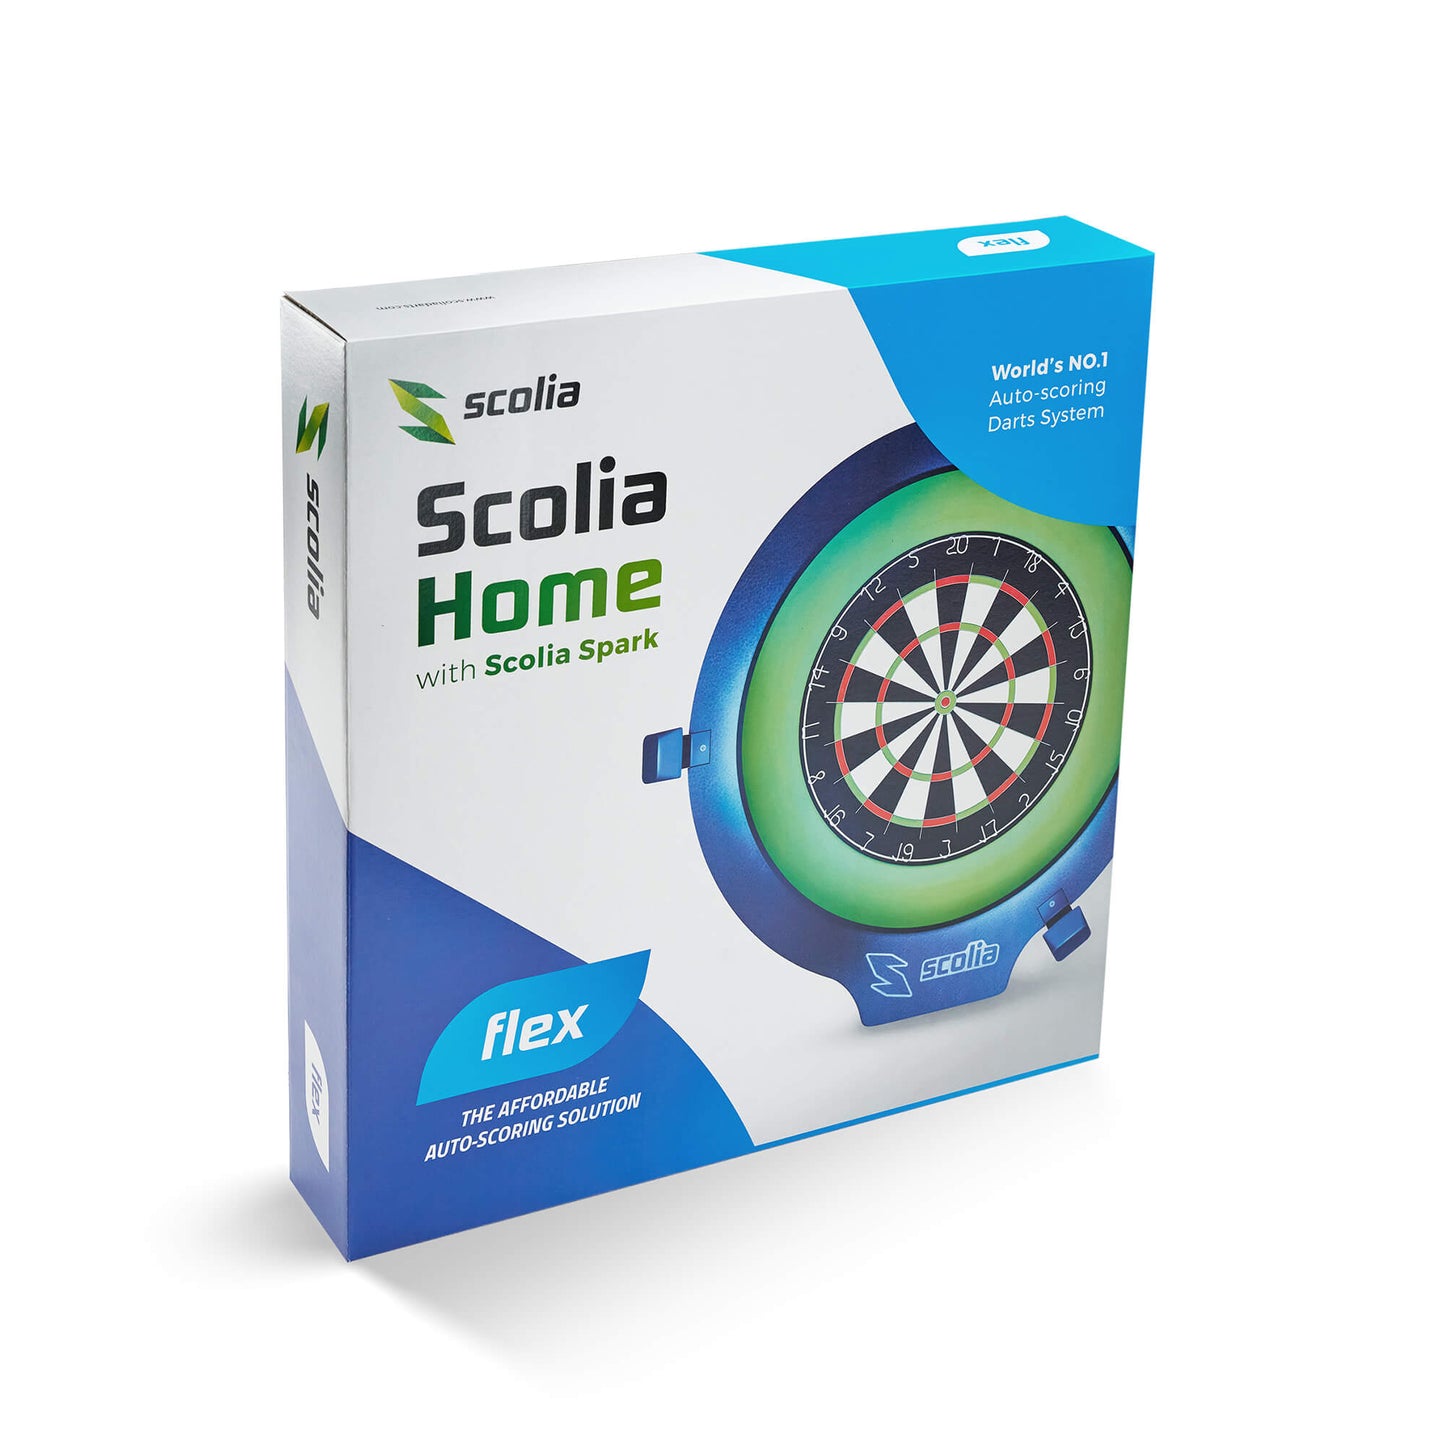 SCOLIA - HOME 'FLEX' - AUTOMATIC SCORING - ONLINE TOURNAMENT PLAY! - WITH BUILT IN LED LIGHTING